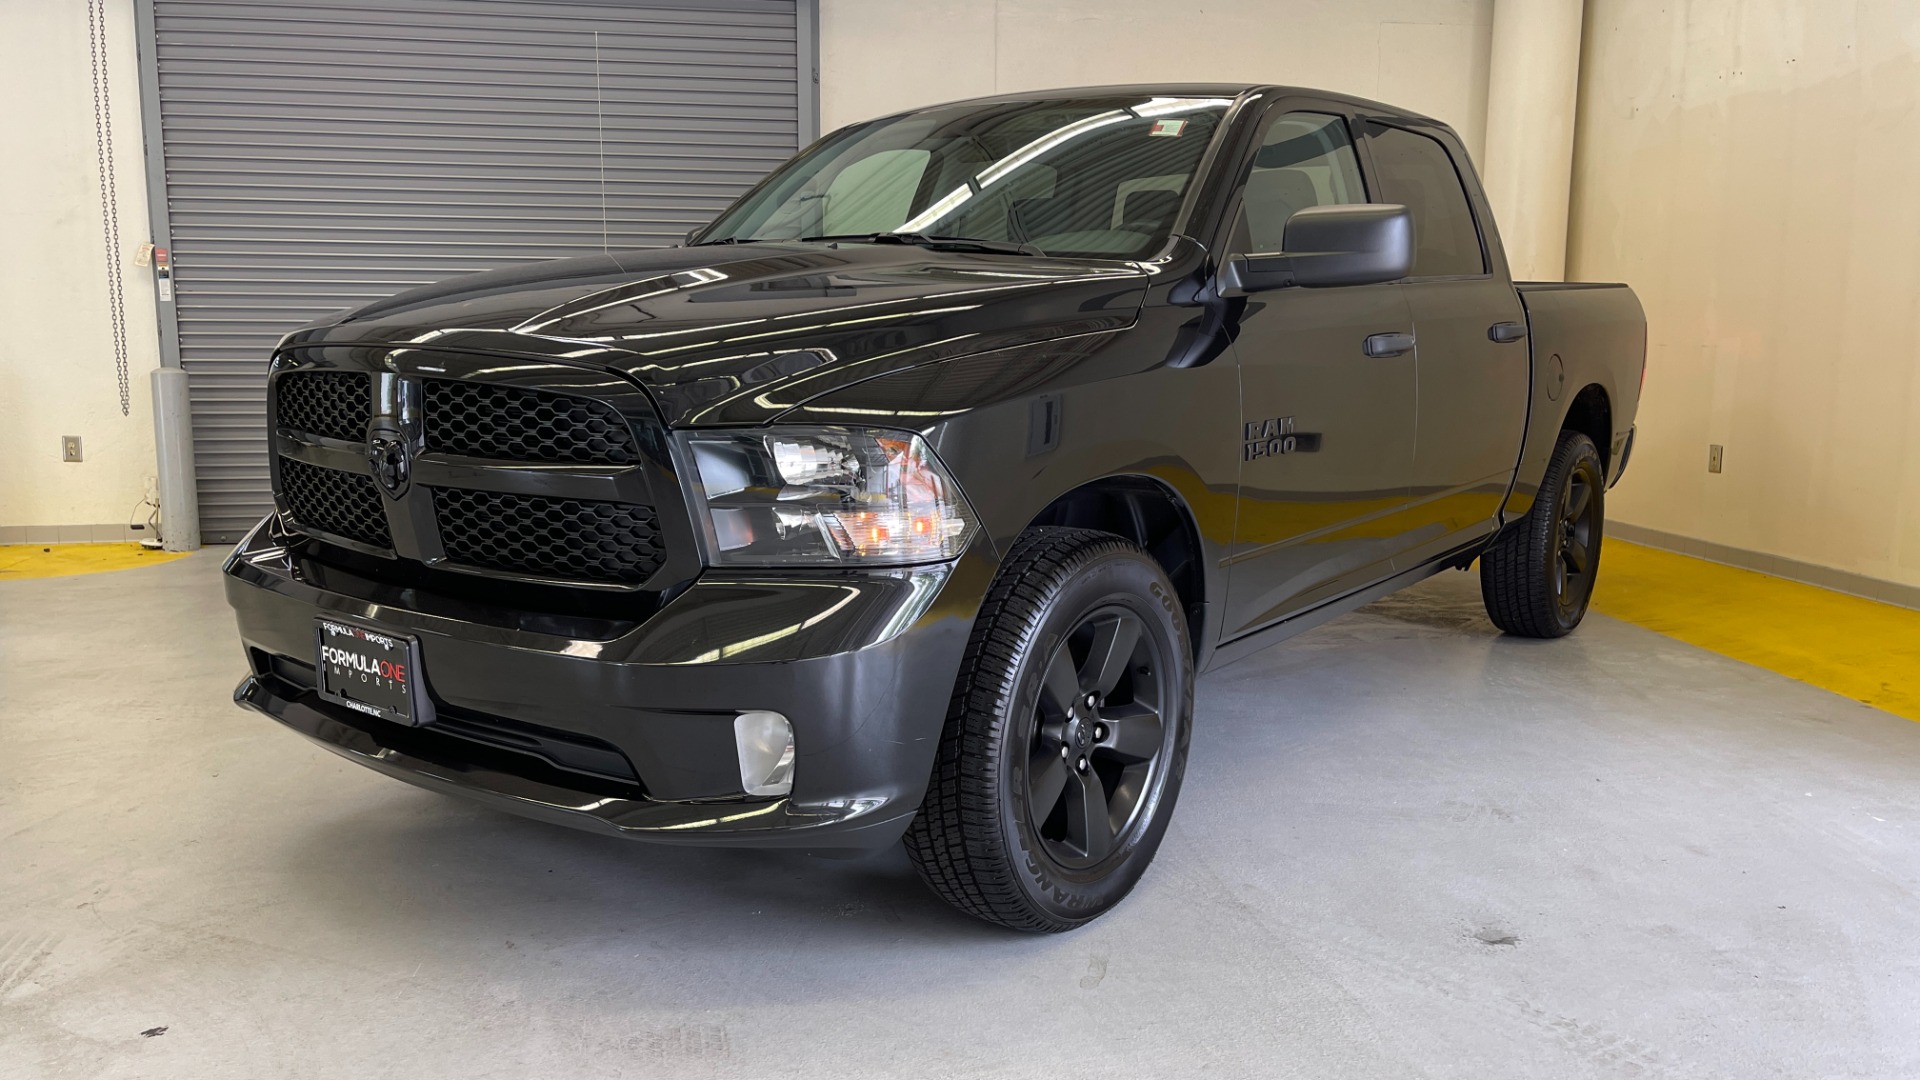 Used 2018 Ram 1500 EXPRESS CREWCAB 4X4 / 3.6L V6 / 8-SPD AUTO / REARVIEW for sale Sold at Formula Imports in Charlotte NC 28227 4